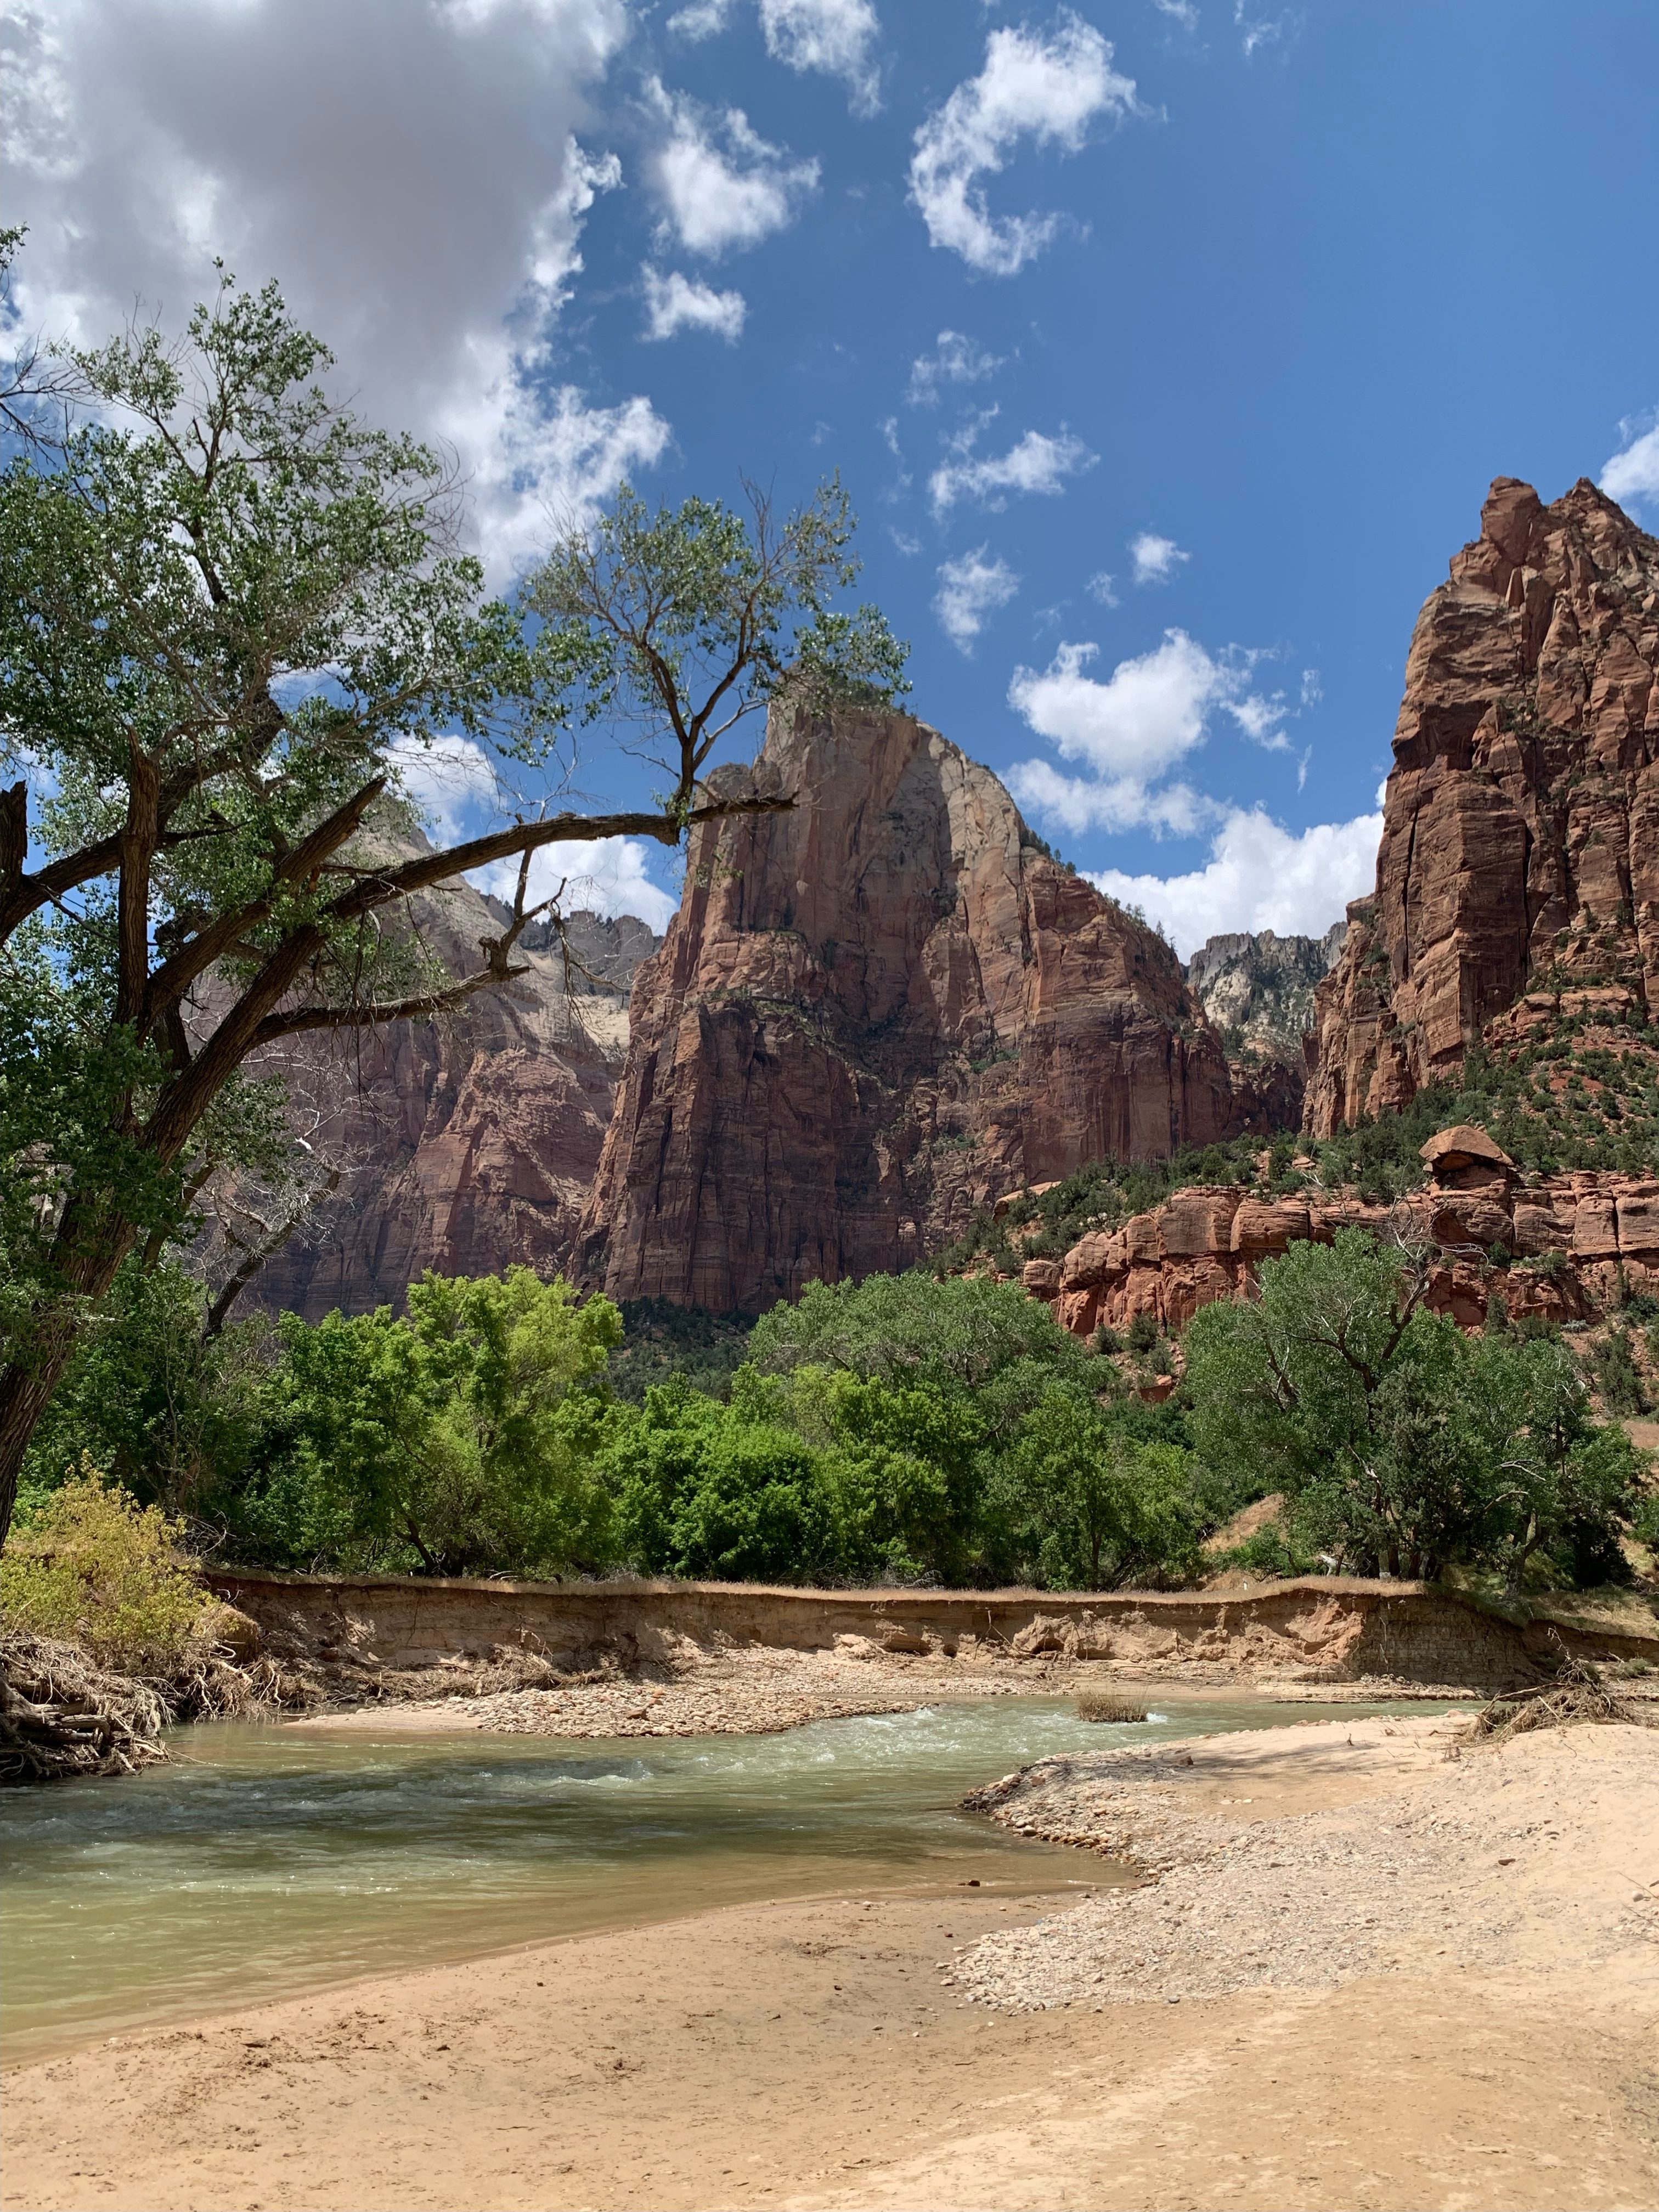 Zion National Park: Court of the Patriarchs and the Virgin River